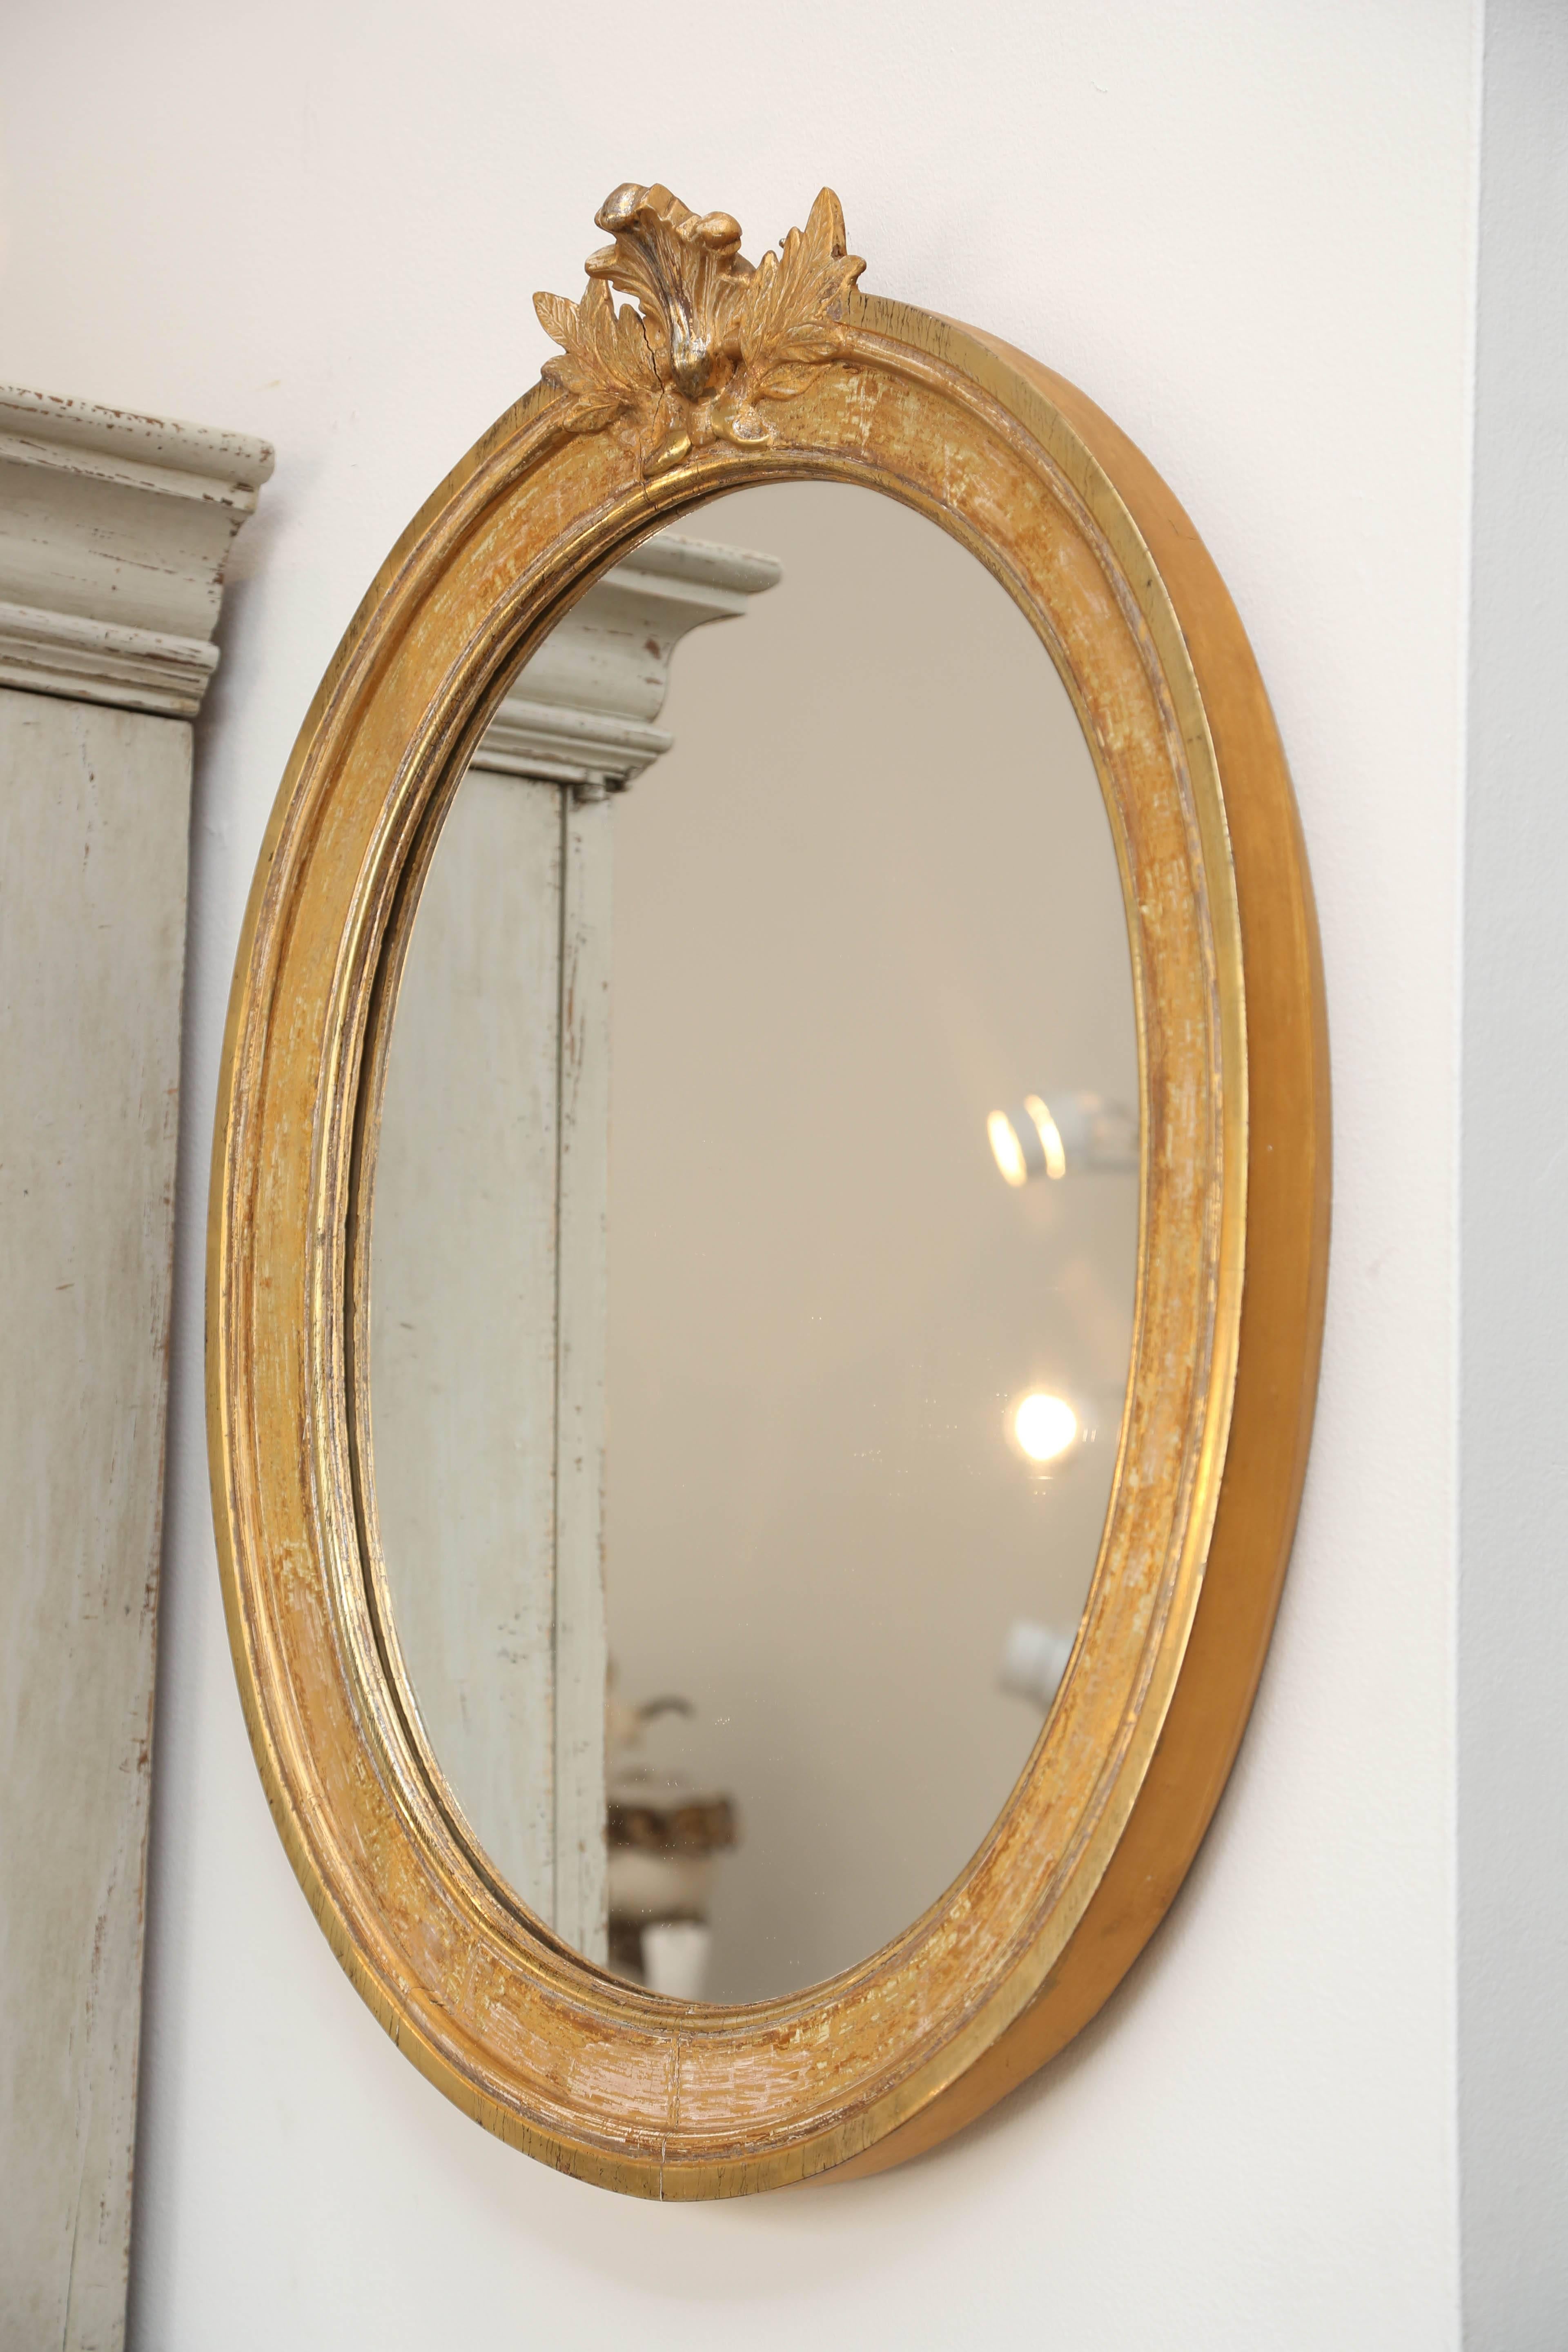 Pair of Antique Swedish Late Gustavian Giltwood Mirrors, Early 19th Century For Sale 3